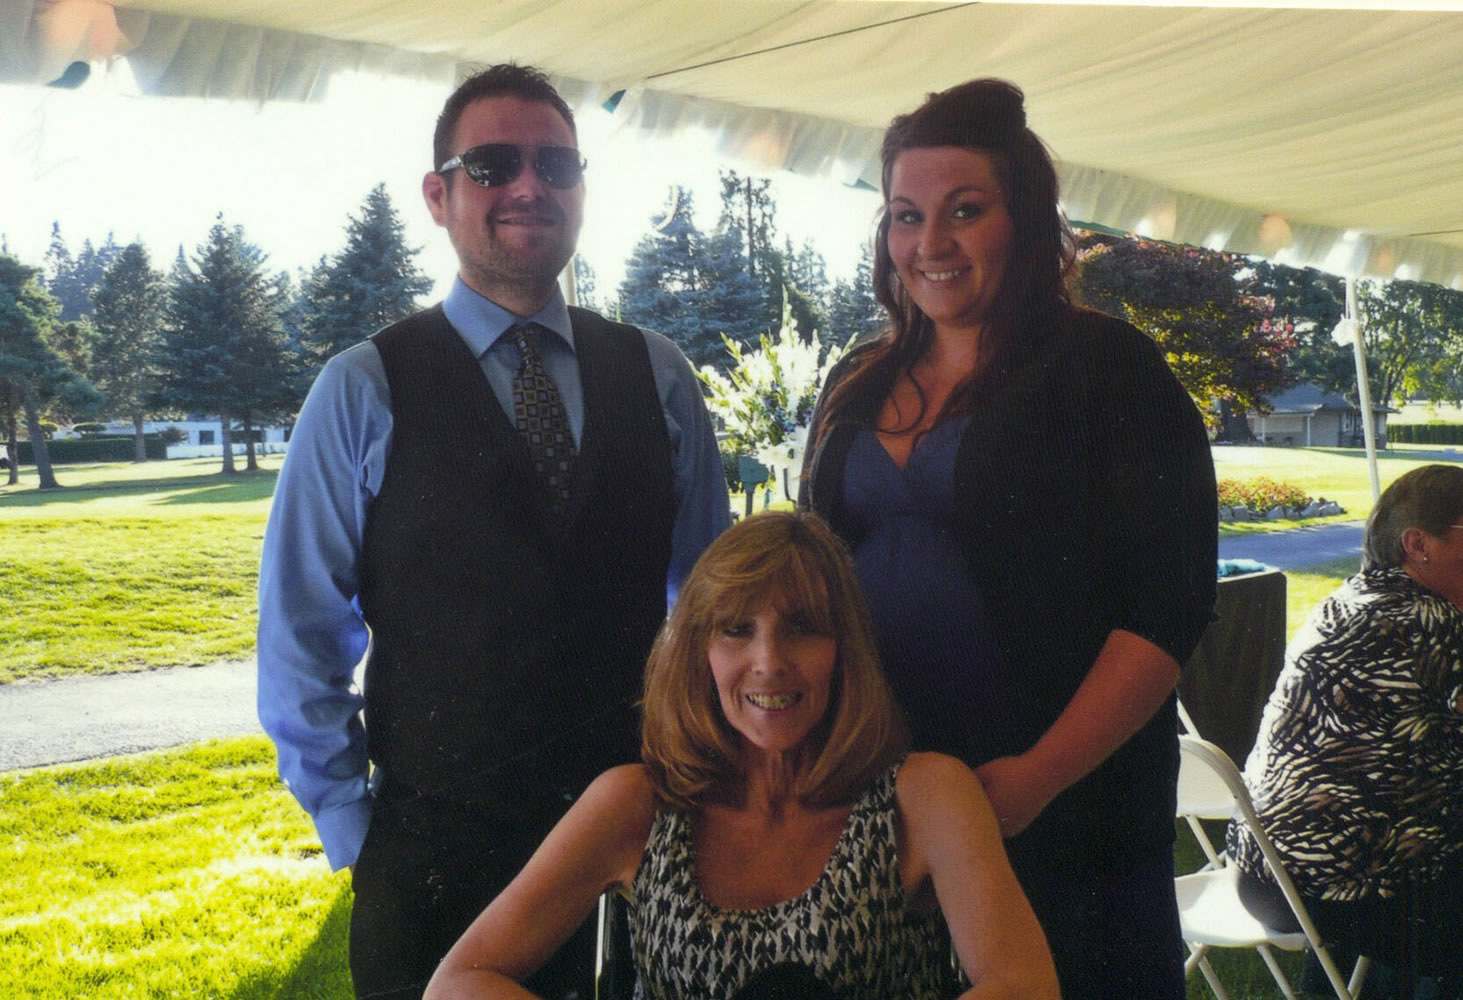 Luke Ashe attends a July wedding with his sister, Sarah Ashe, right, and mother, Gwenn Ashe.